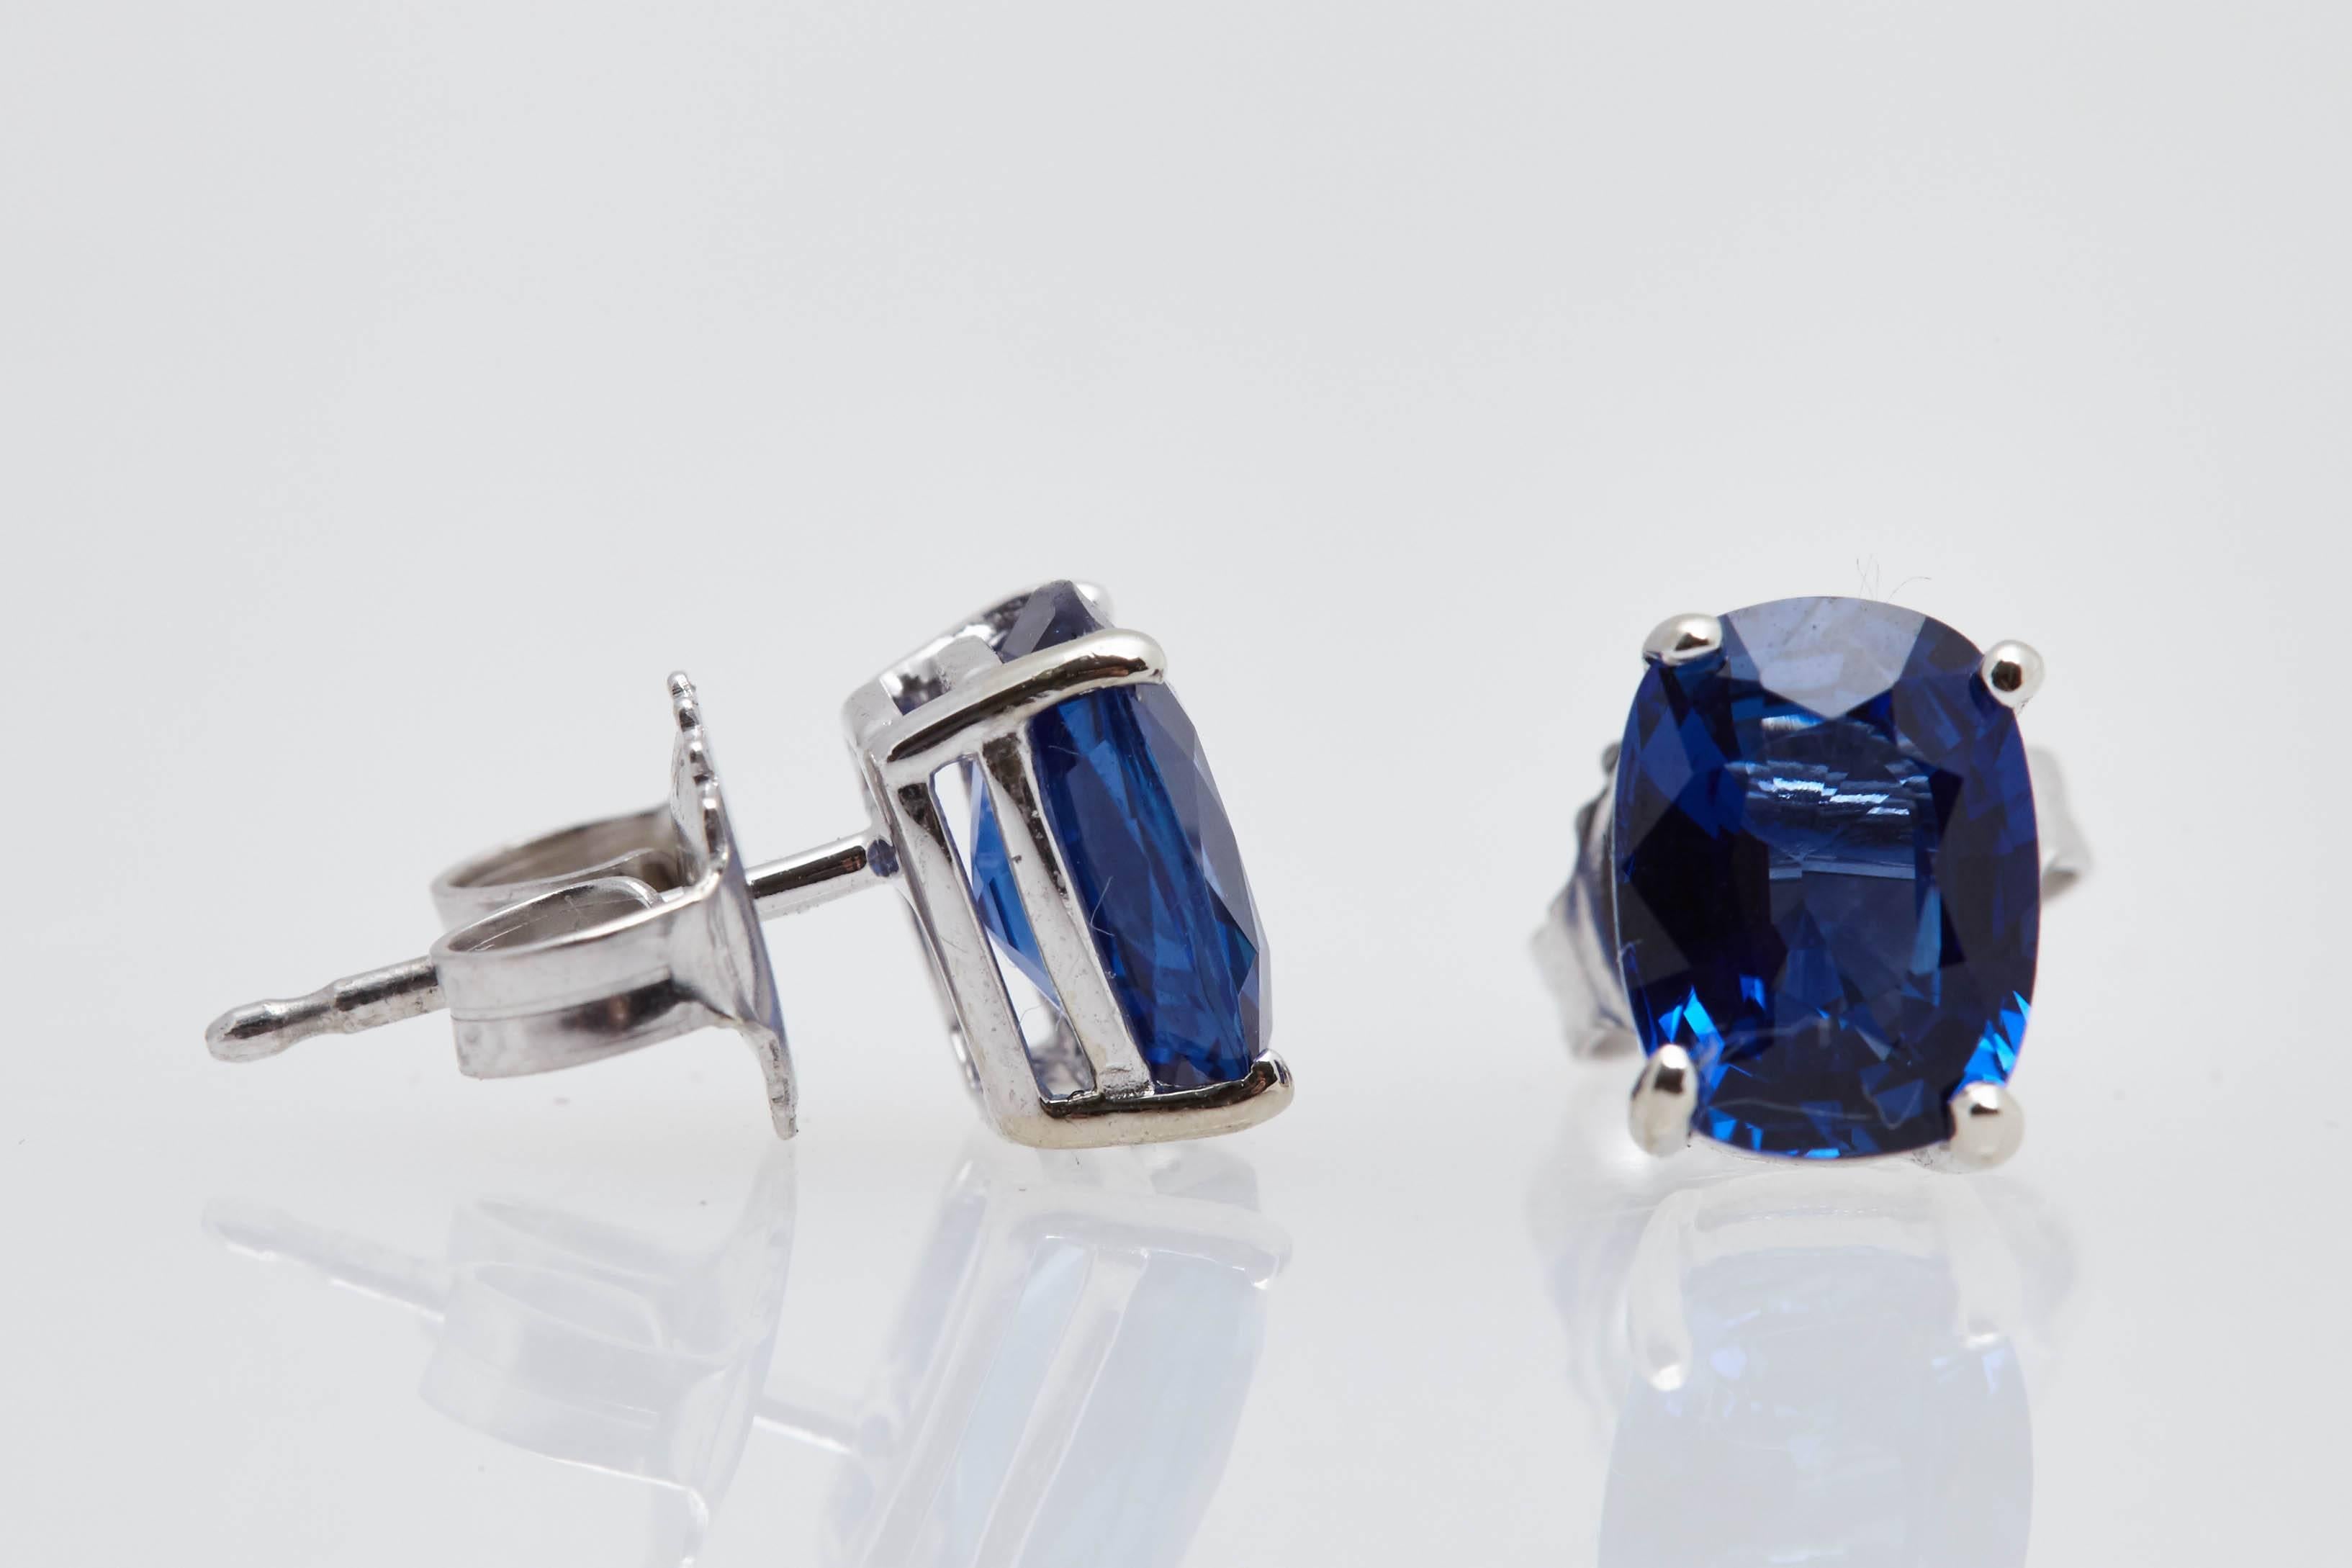 Pair of beautiful cushion shaped blue sapphires with a total weight of 2.81 carats.  The sapphire's are mounted in fourteen karat white gold push back earrings.  The sapphires measure approximately 7.5 mm.x 5.6 mm.